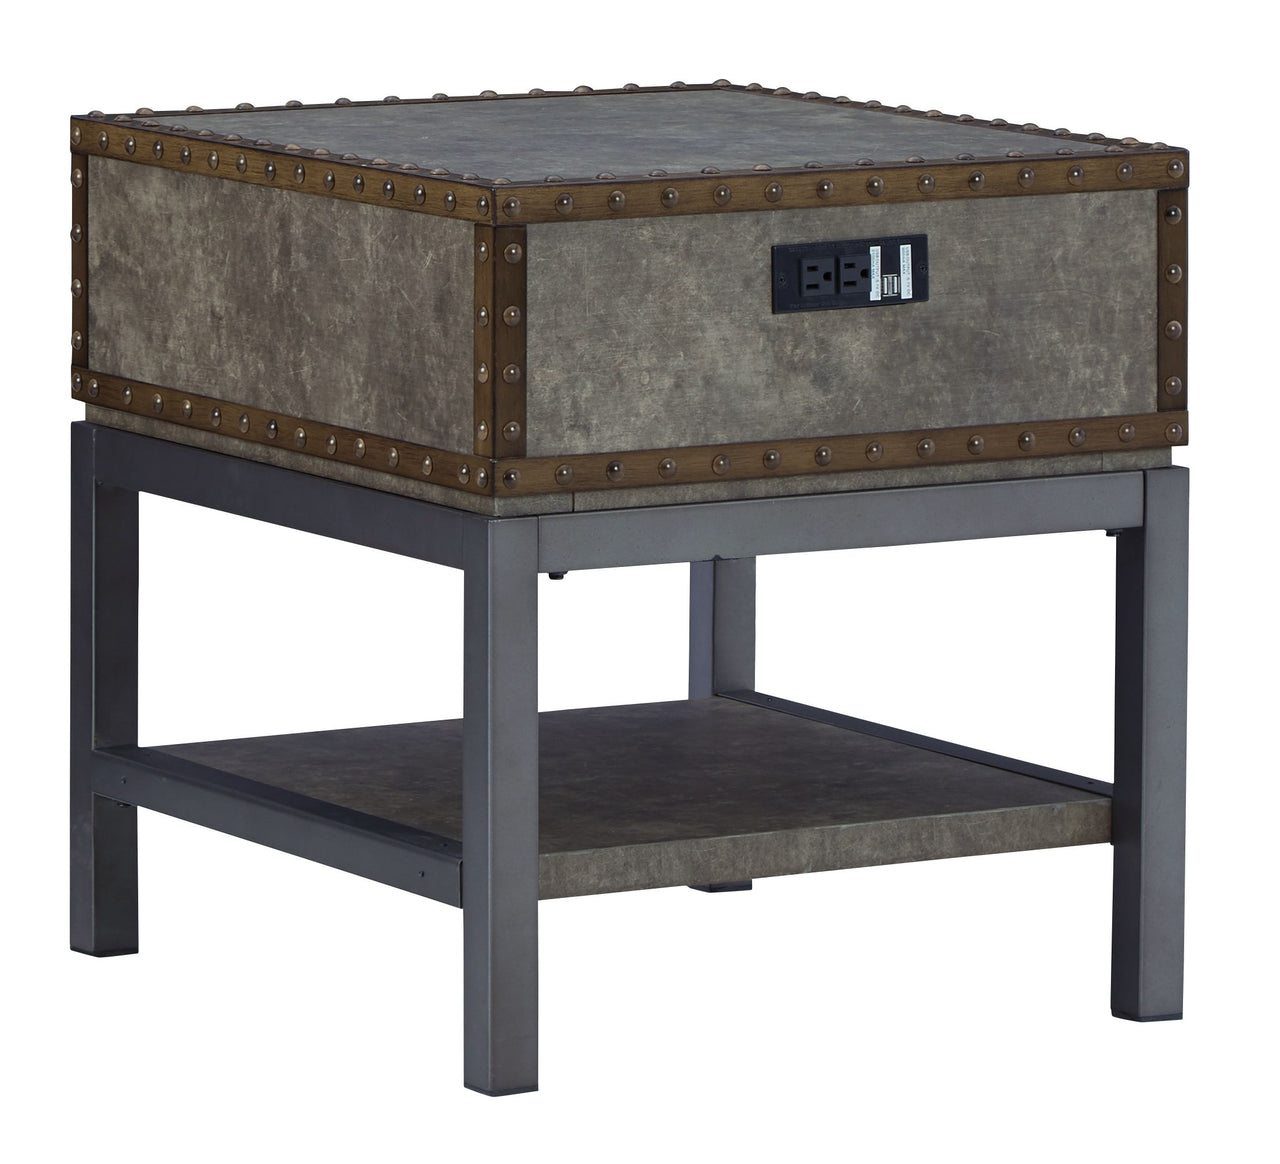 Derrylin - Brown - Rectangular End Table - Tony's Home Furnishings